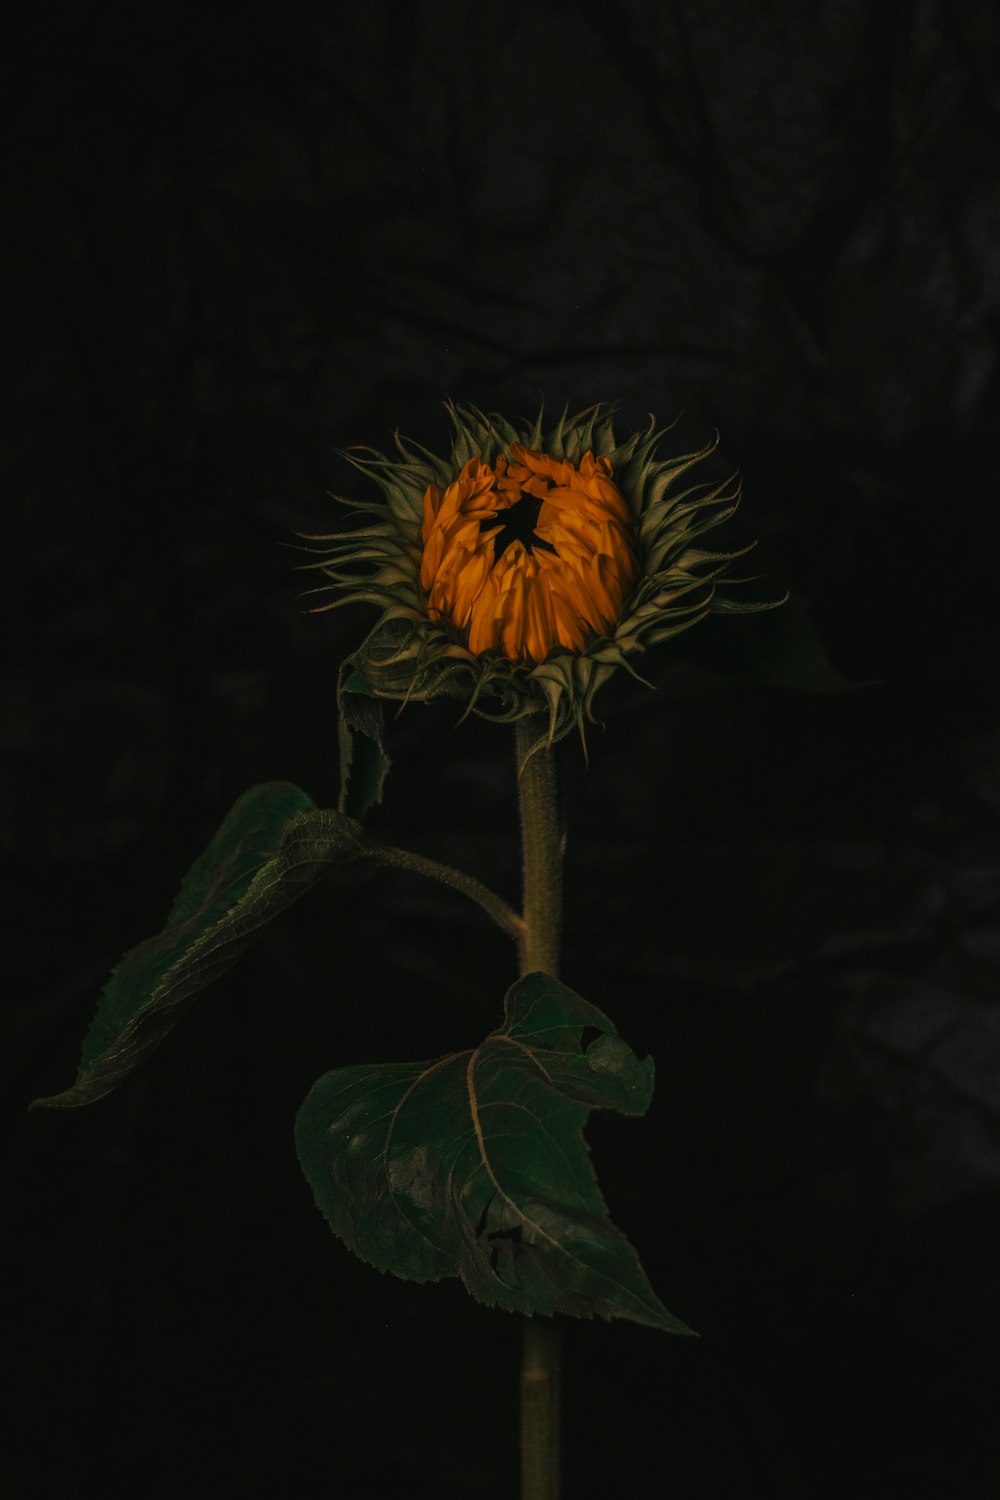 a single sunflower with a dark background